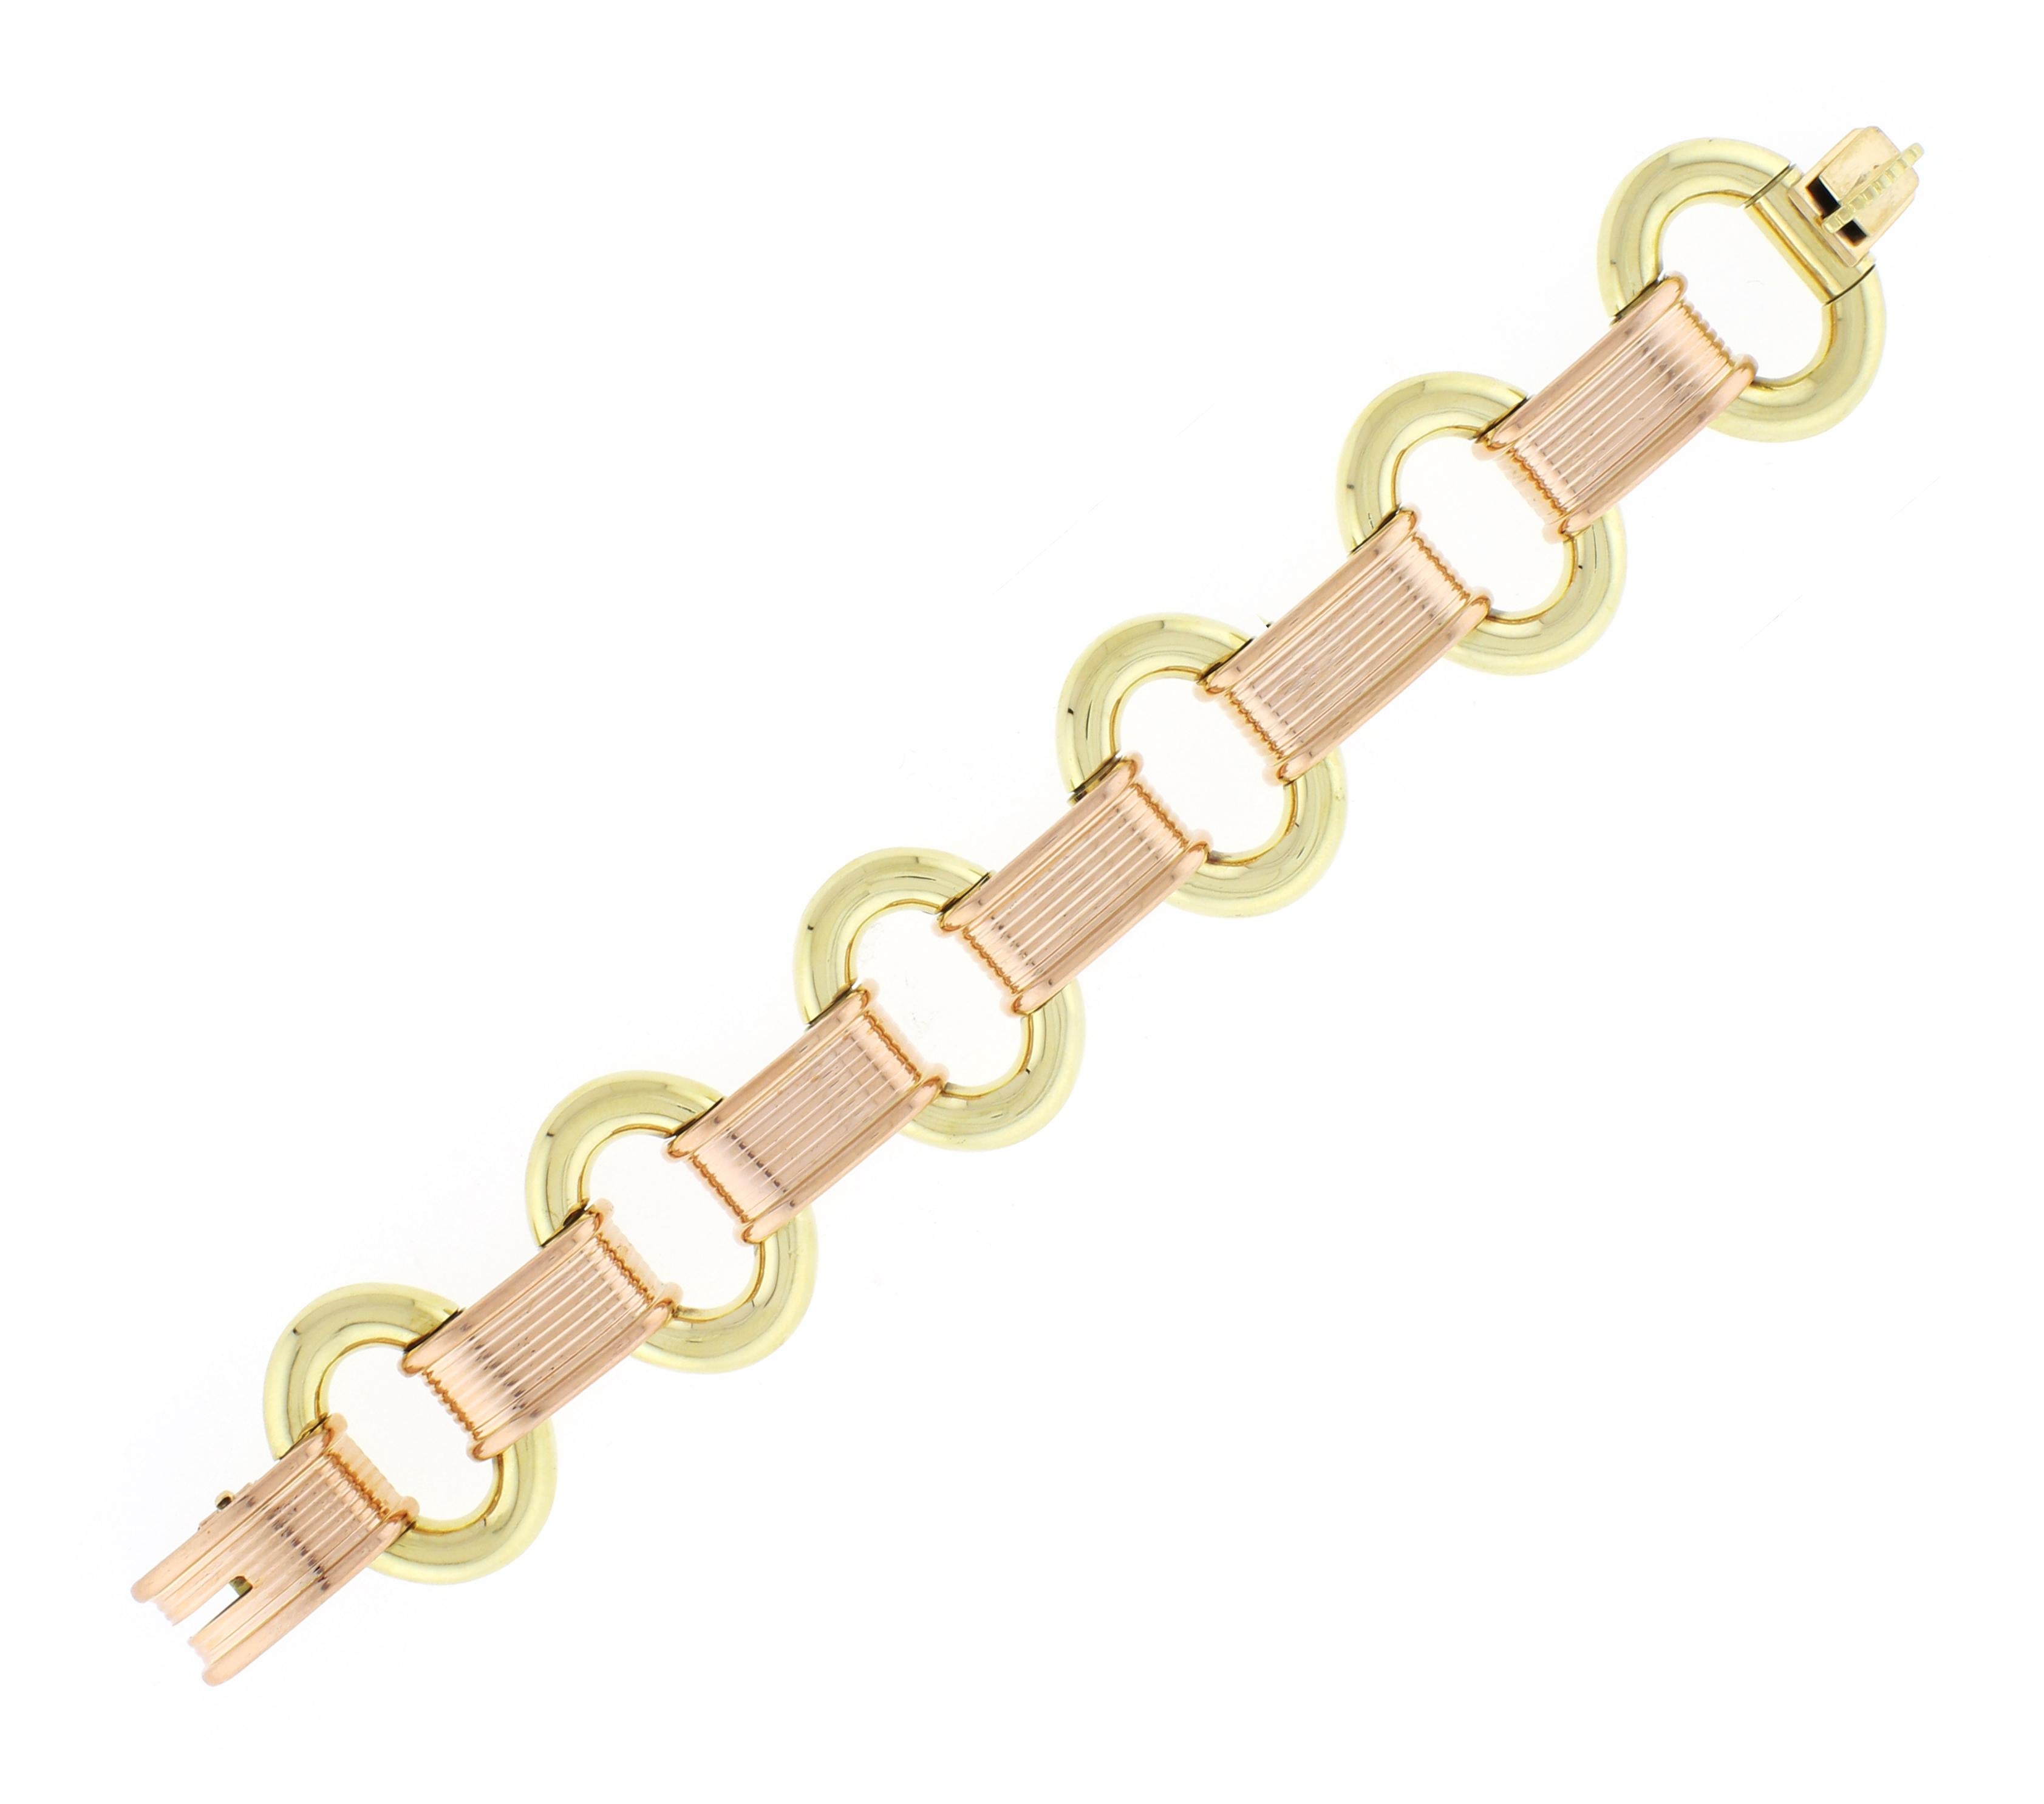 From the fabulous style of the late 1940s retro-modern period, this pink and yellow 14 karat gold bracelet. The bracelet is 1 ¼ inches wide and 7 ¾ long  68.1 grams. The bracelet is in near perfect condition